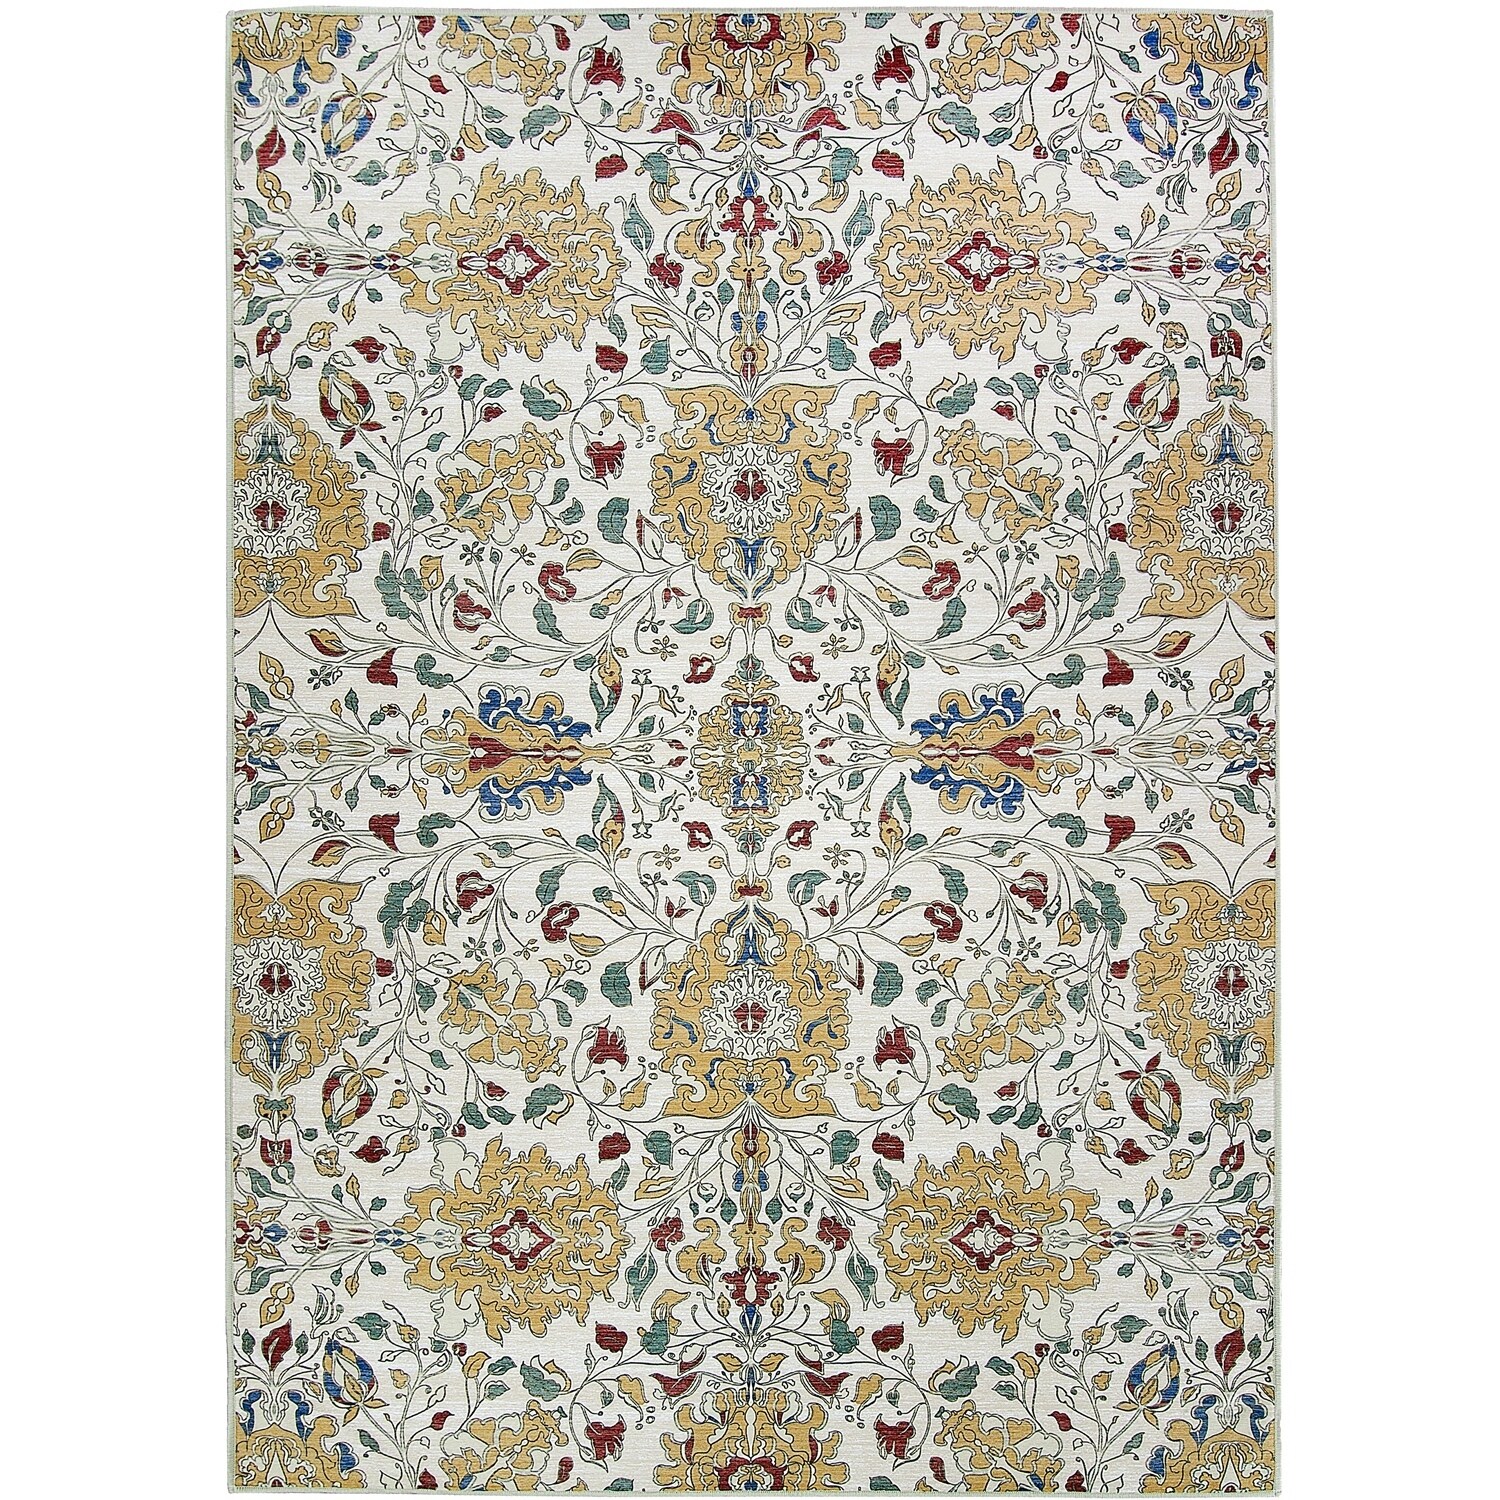 washable ruggable area rug floral cream 5x7 pet traditional resistant stain ruggables joann